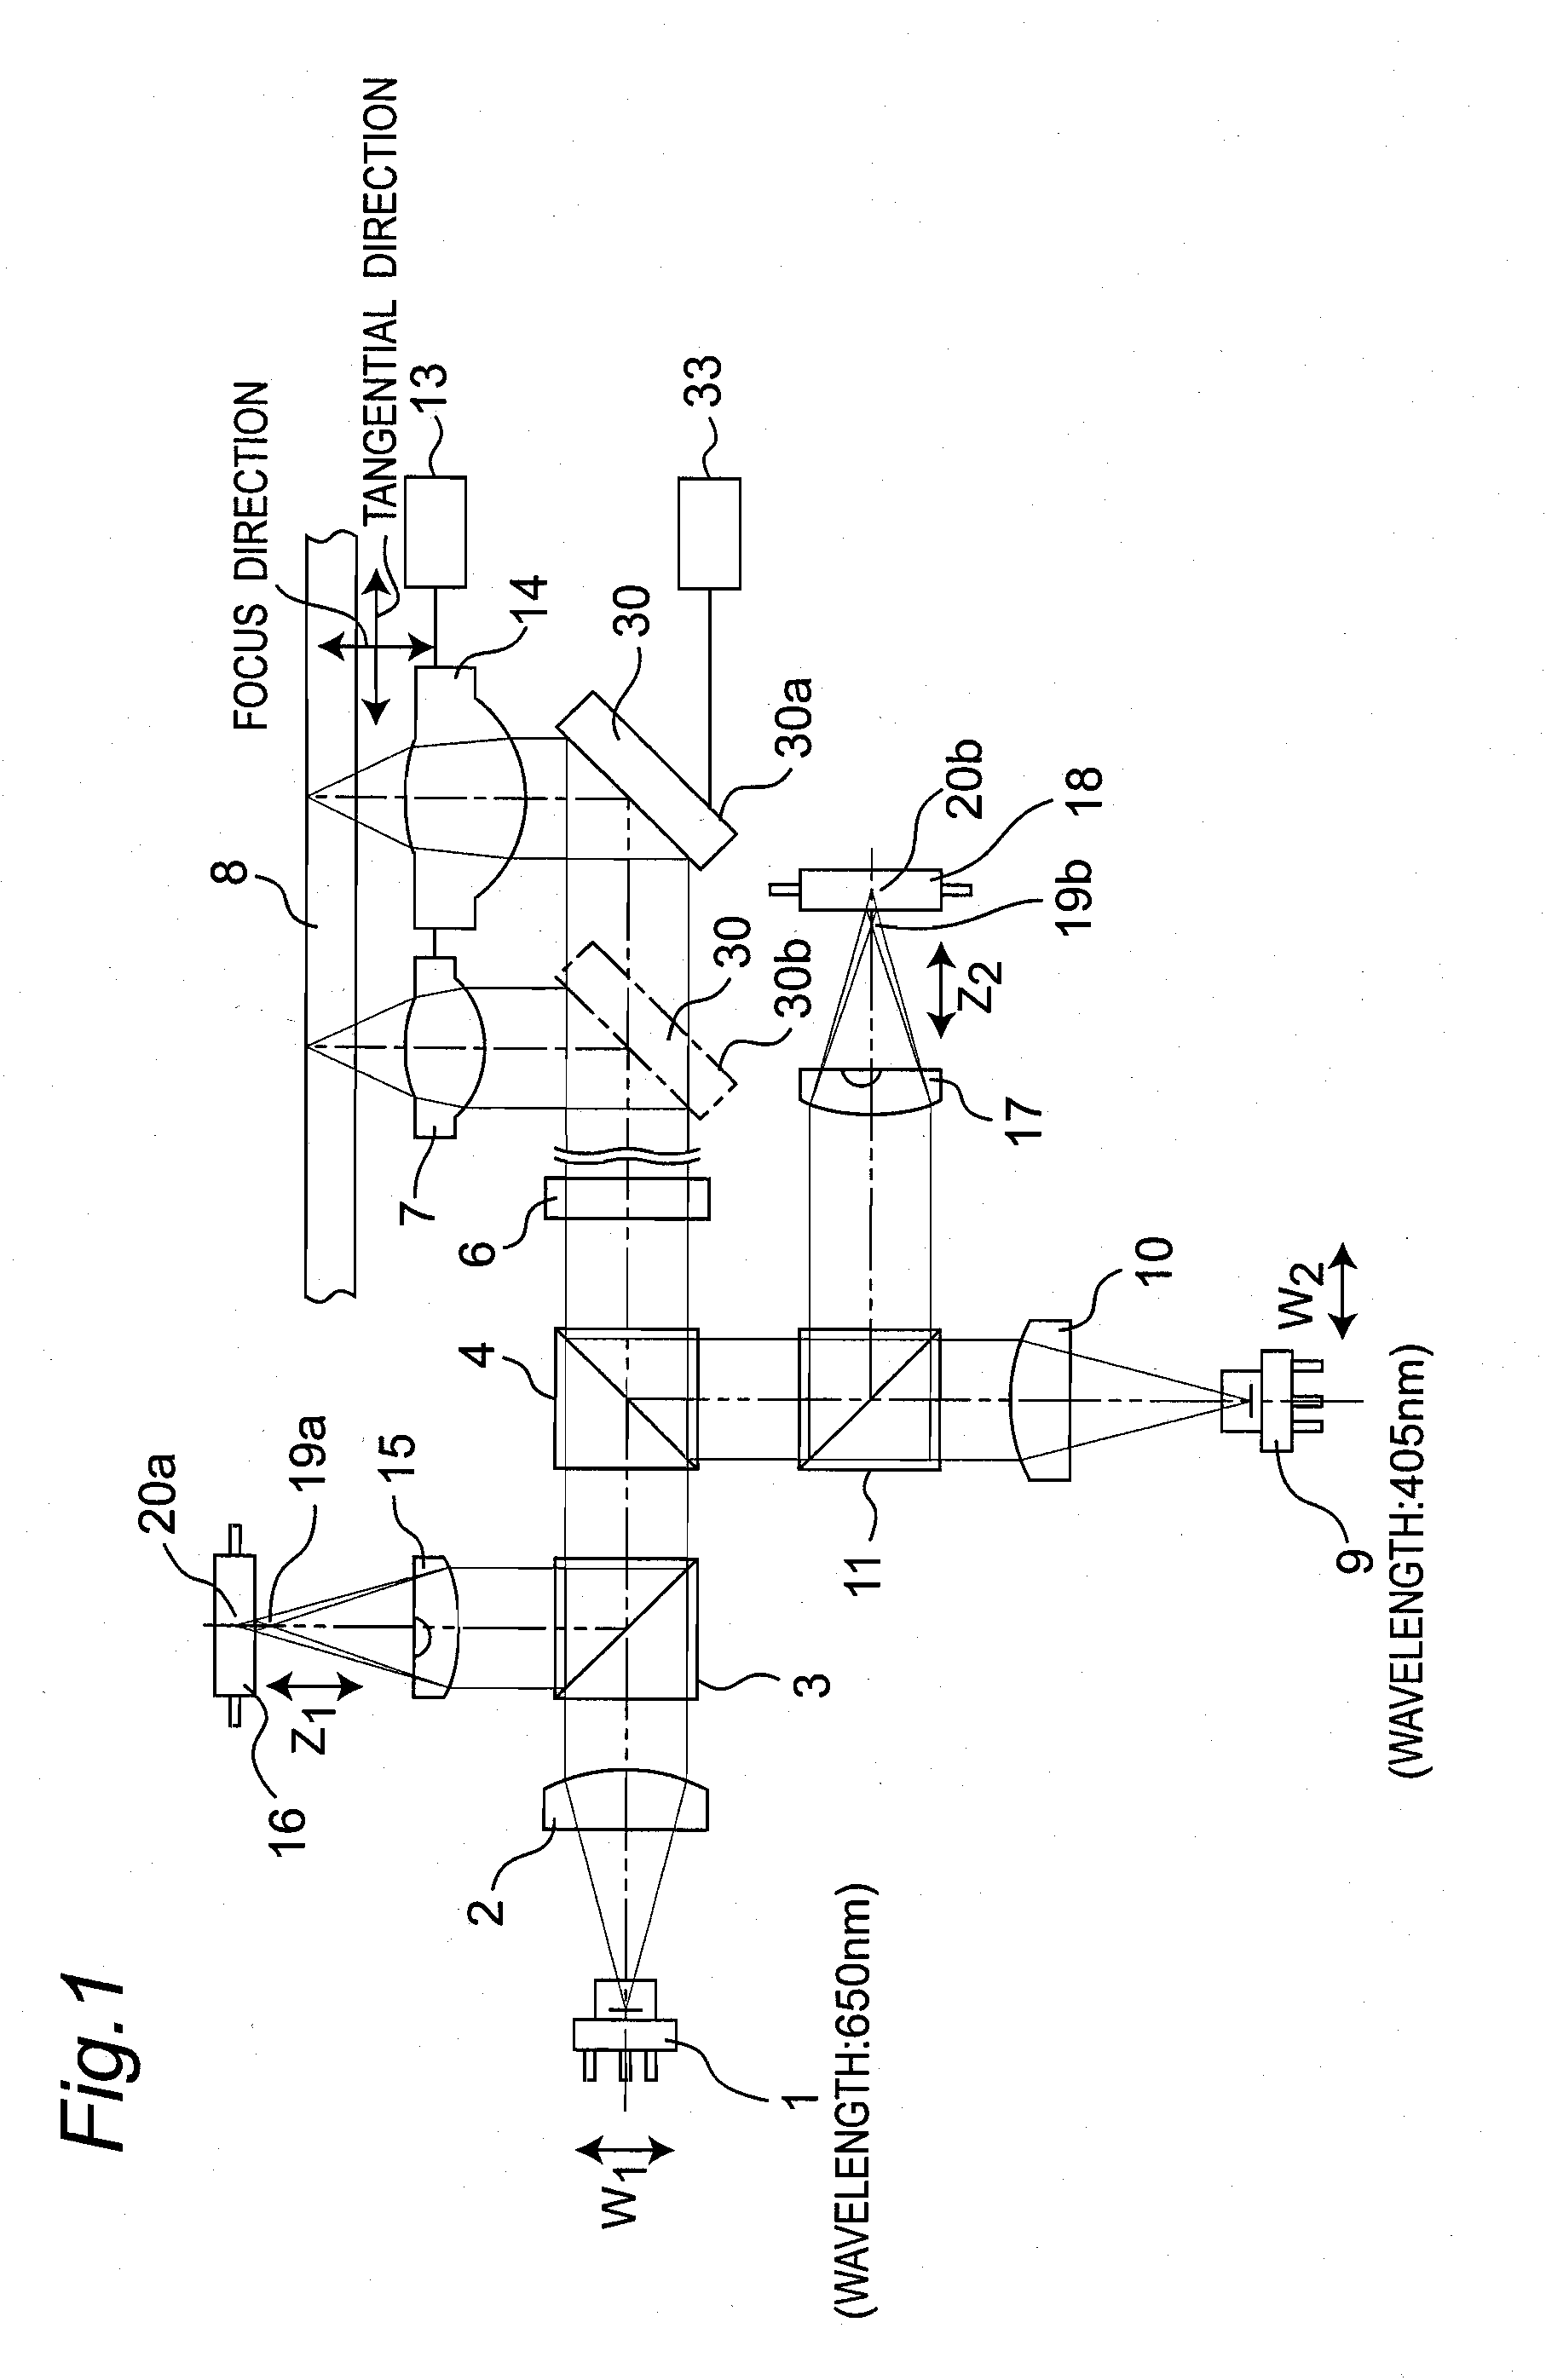 Optical head device for forming light spot on disc-shaped information medium